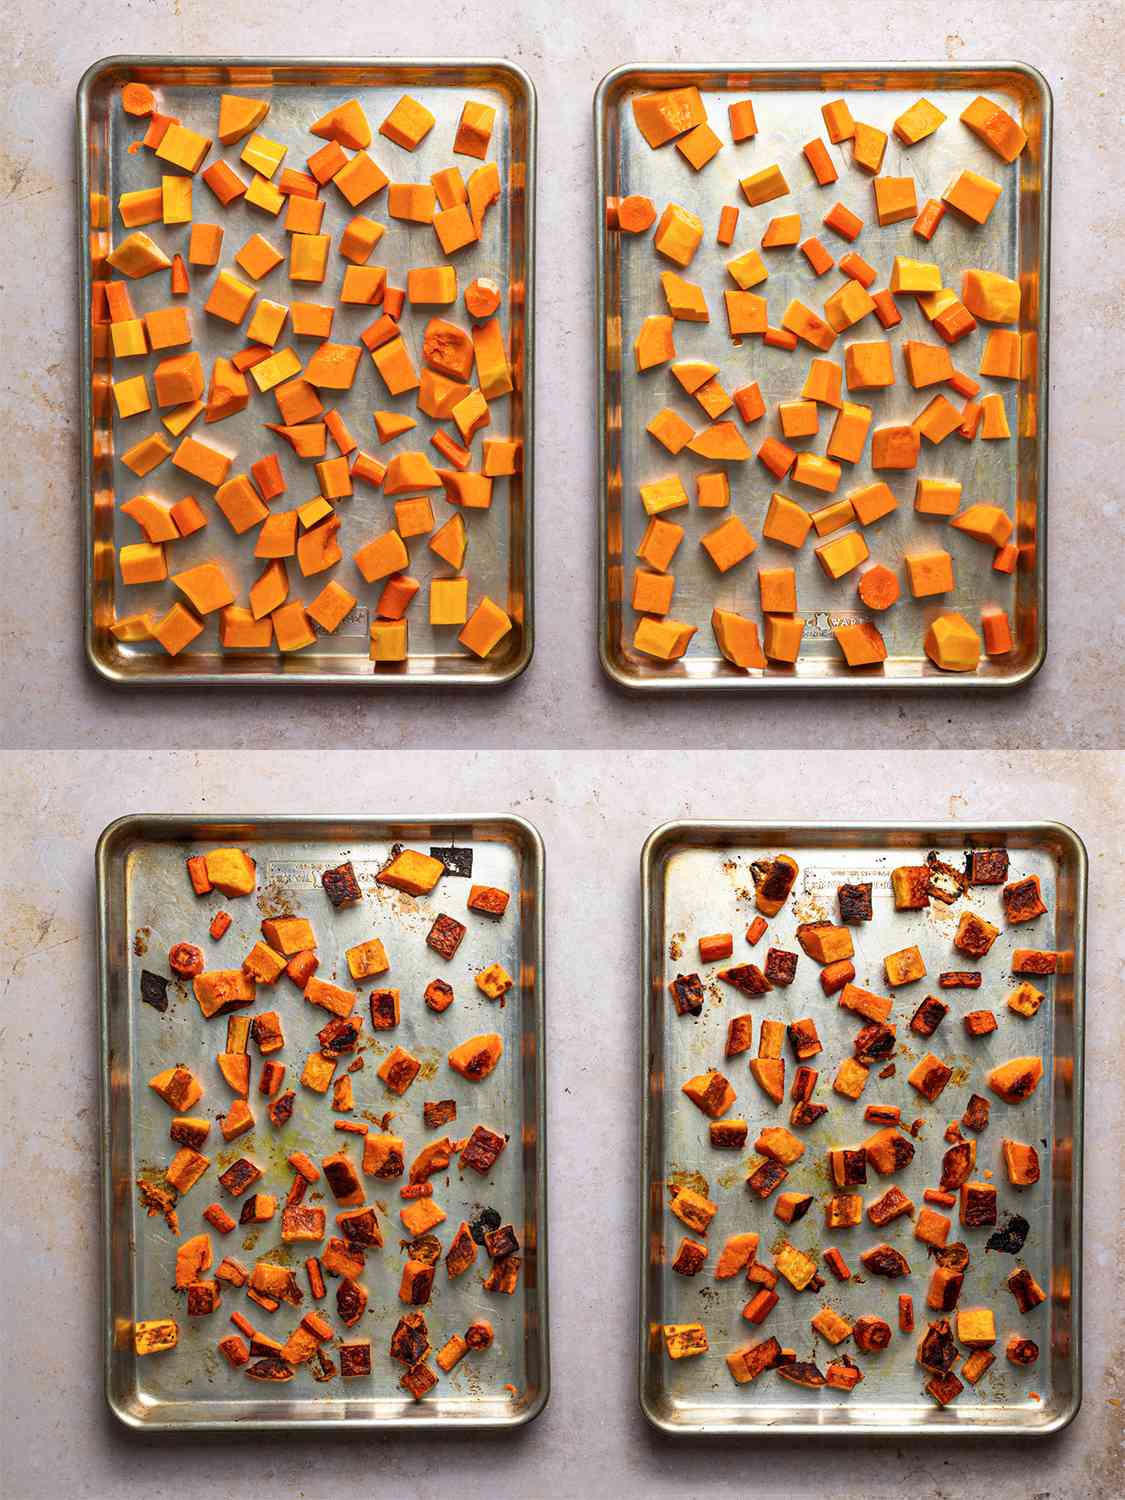 A two-image collage. The top image shows chopped and carrot tossed with olive oil and arranged on 2 rimmed baking sheets, with the vegetables spread out so that they can brown properly. The bottom image shows roasted squash and carrot on rimmed baking sheet after coming out of oven, showing off how theyâre well browned.